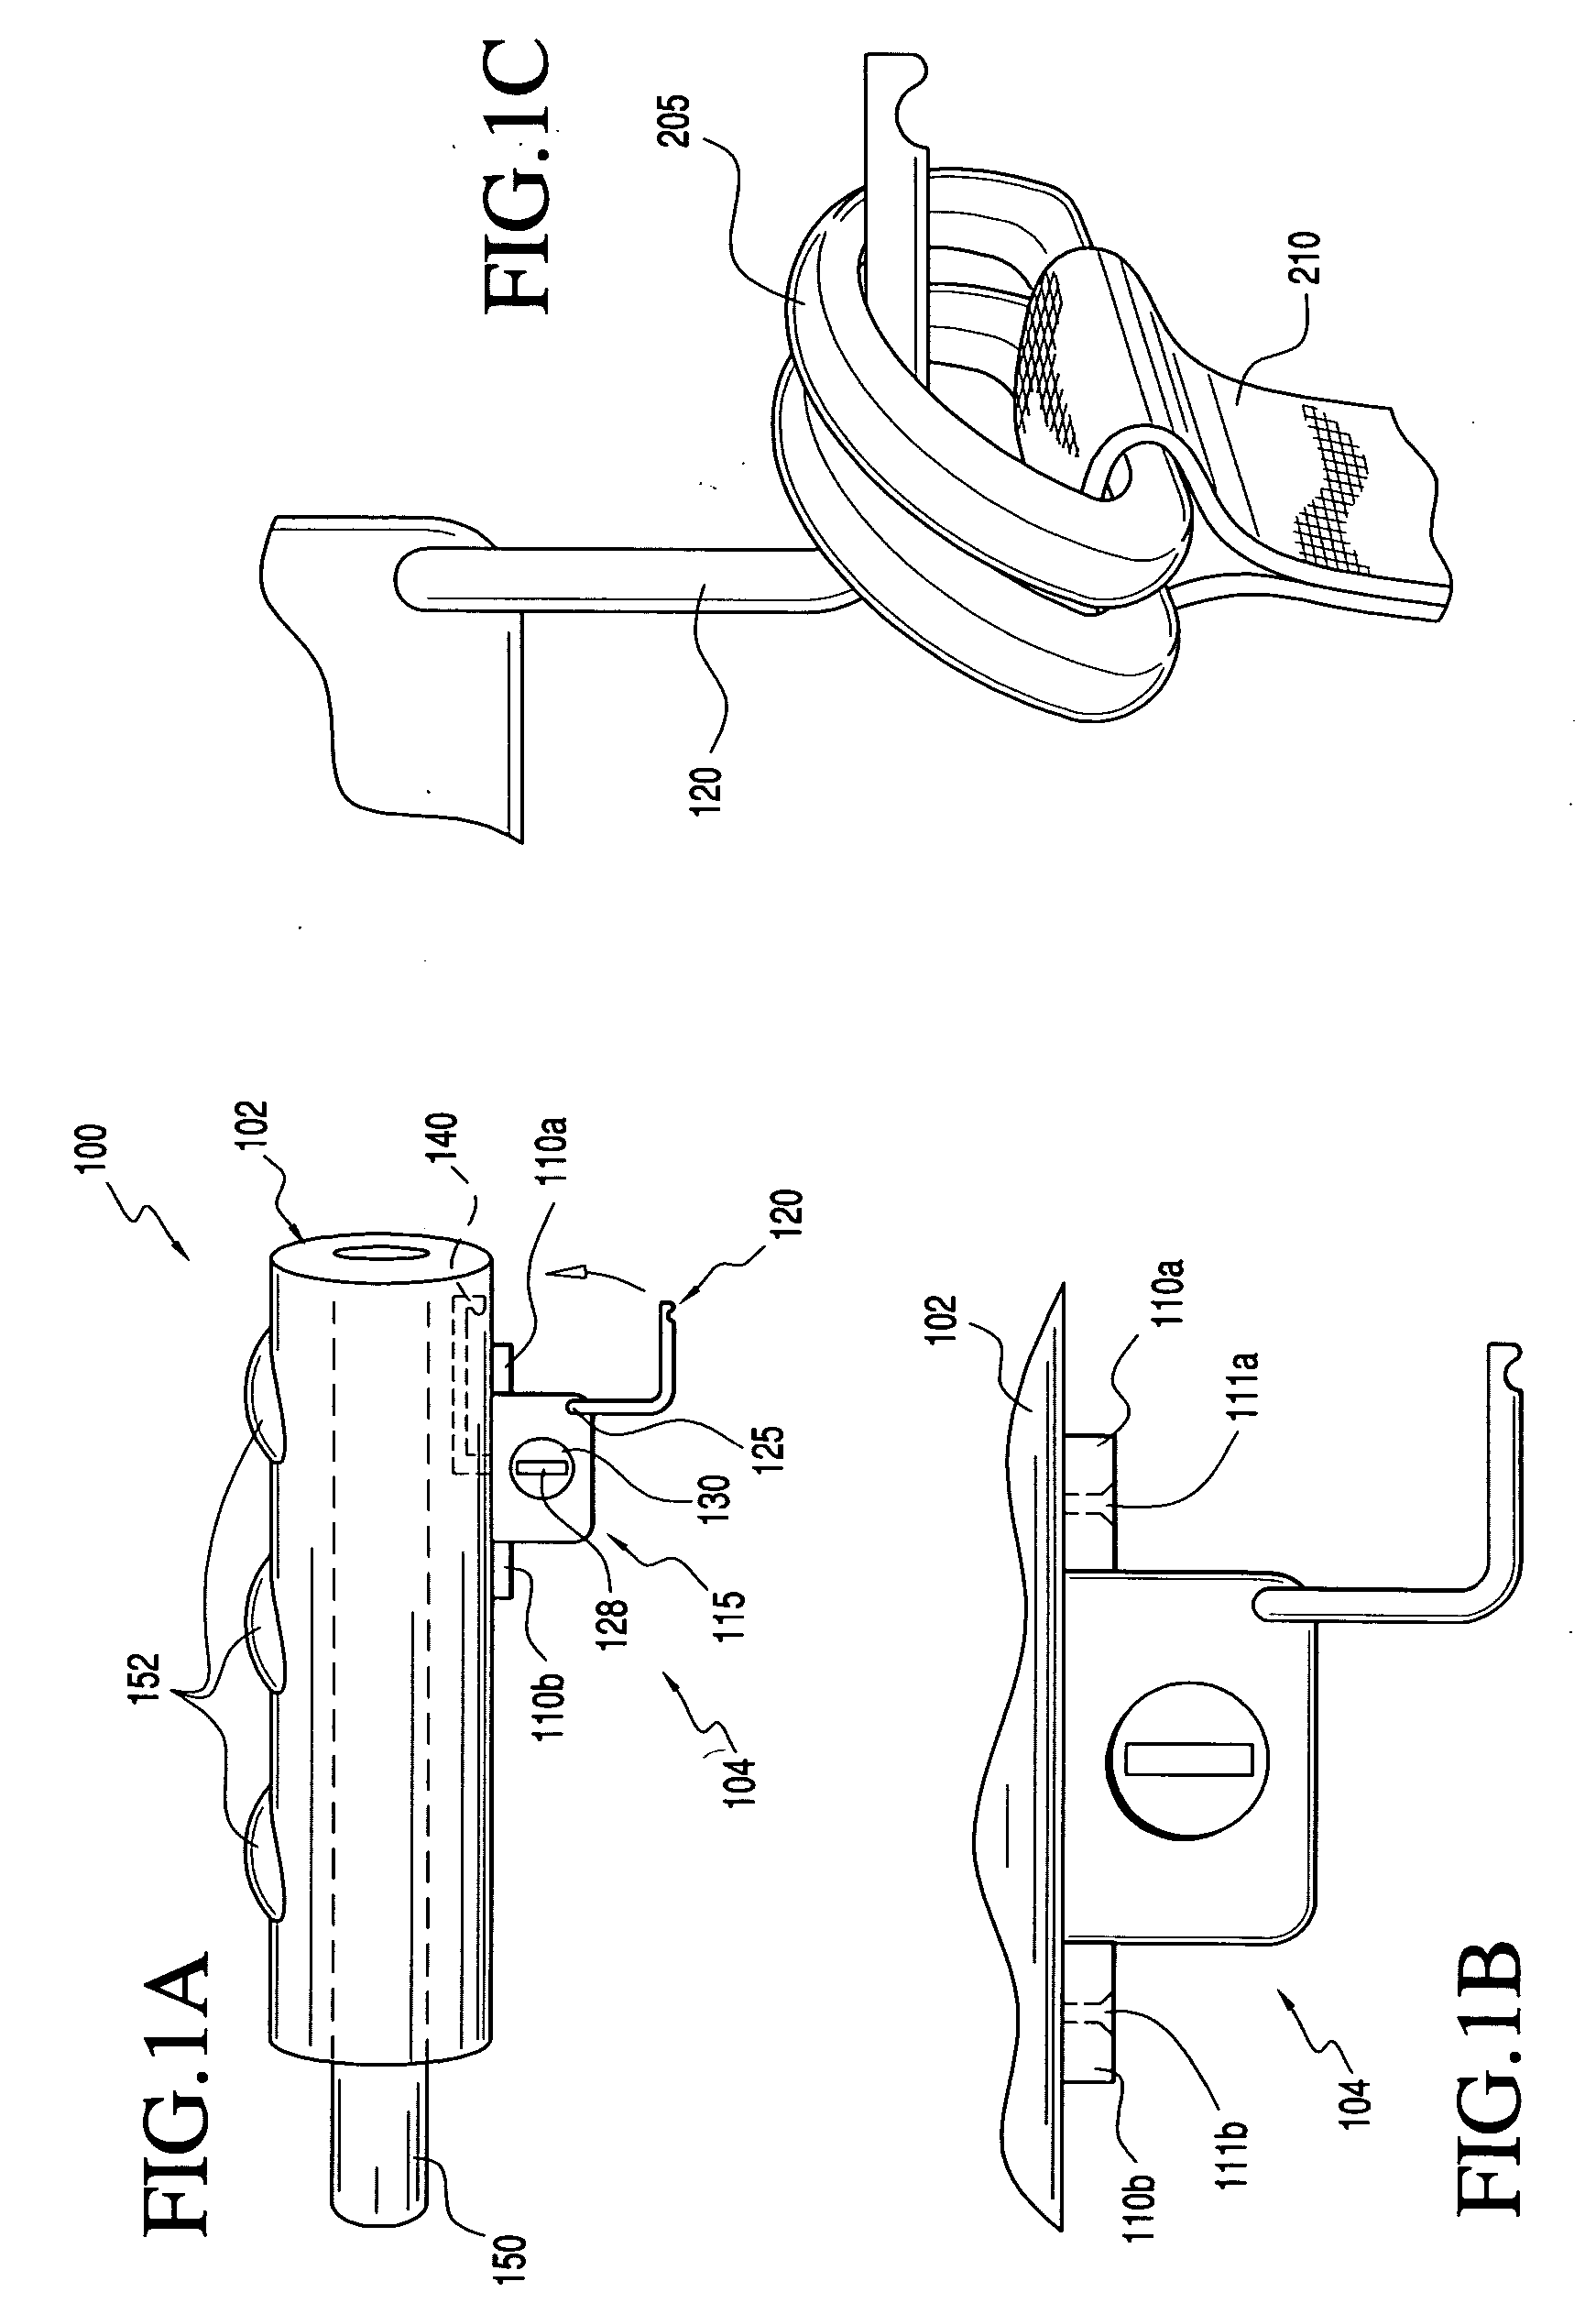 Apparatus for locking a device to a cycle footrest